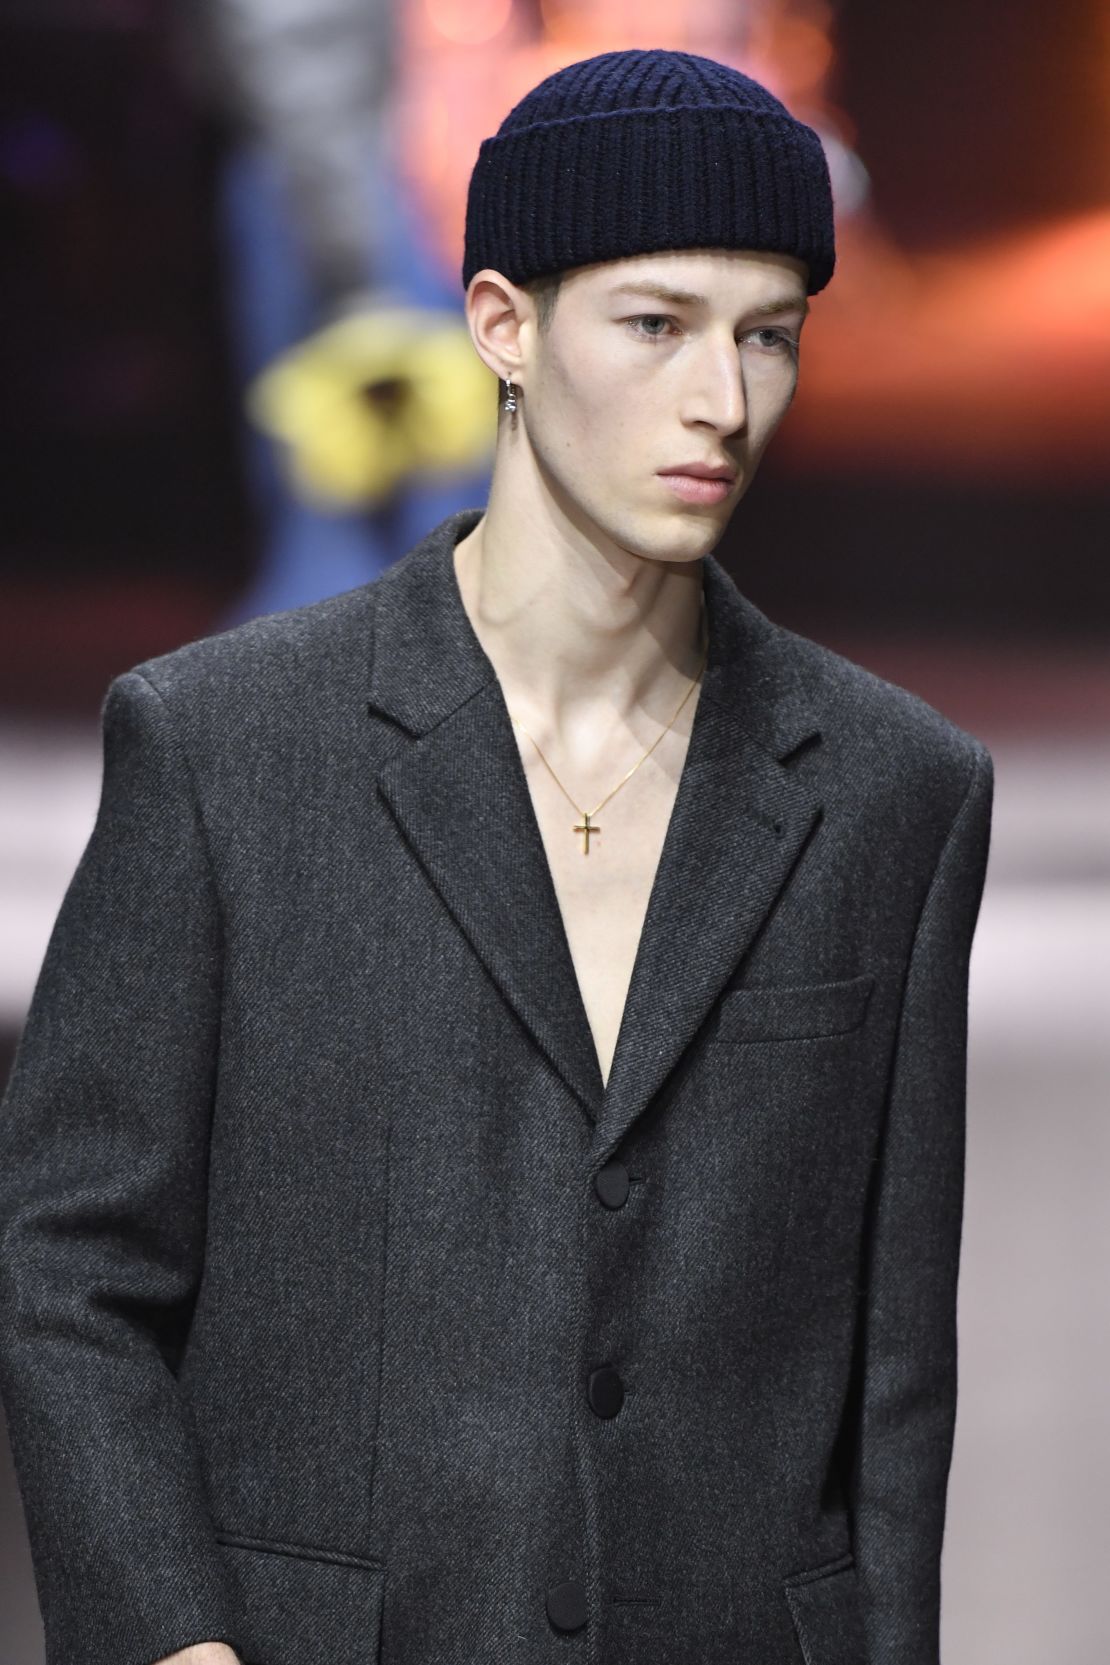 Simplicity, bare torsos and fine tailoring at Men’s Fashion Week in ...